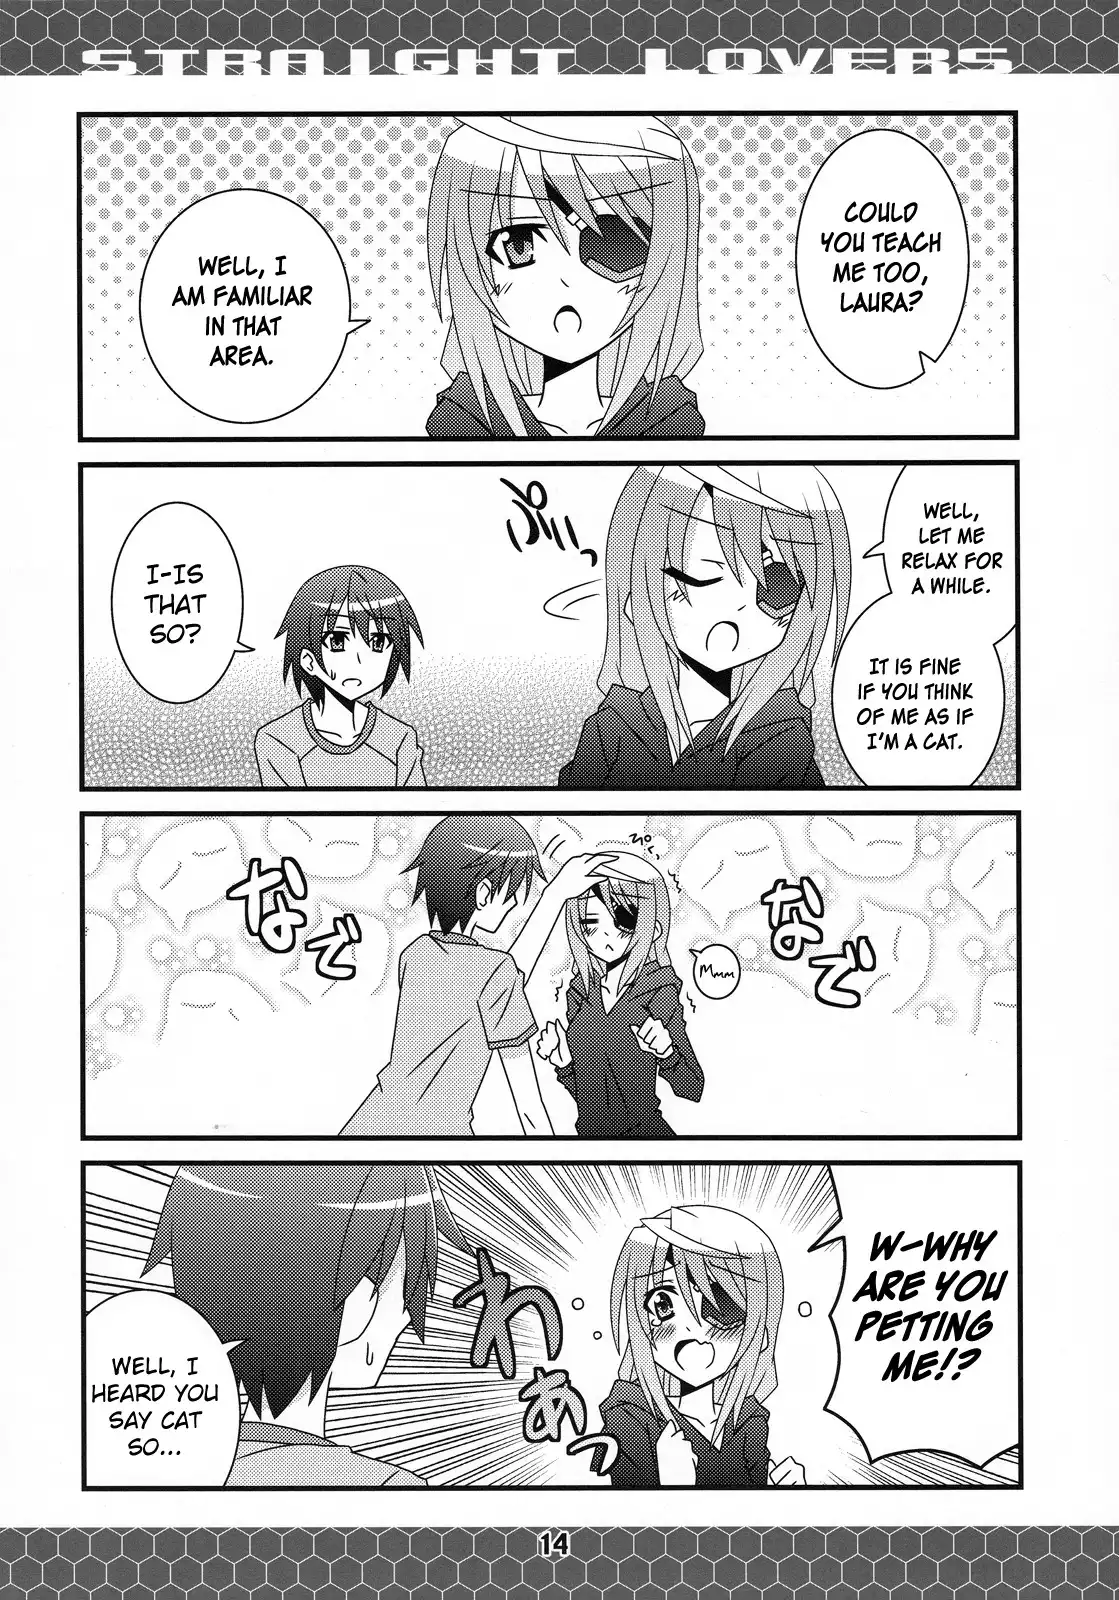 Infinite Stratos - Straight Lovers (Doujinshi) Chapter 0